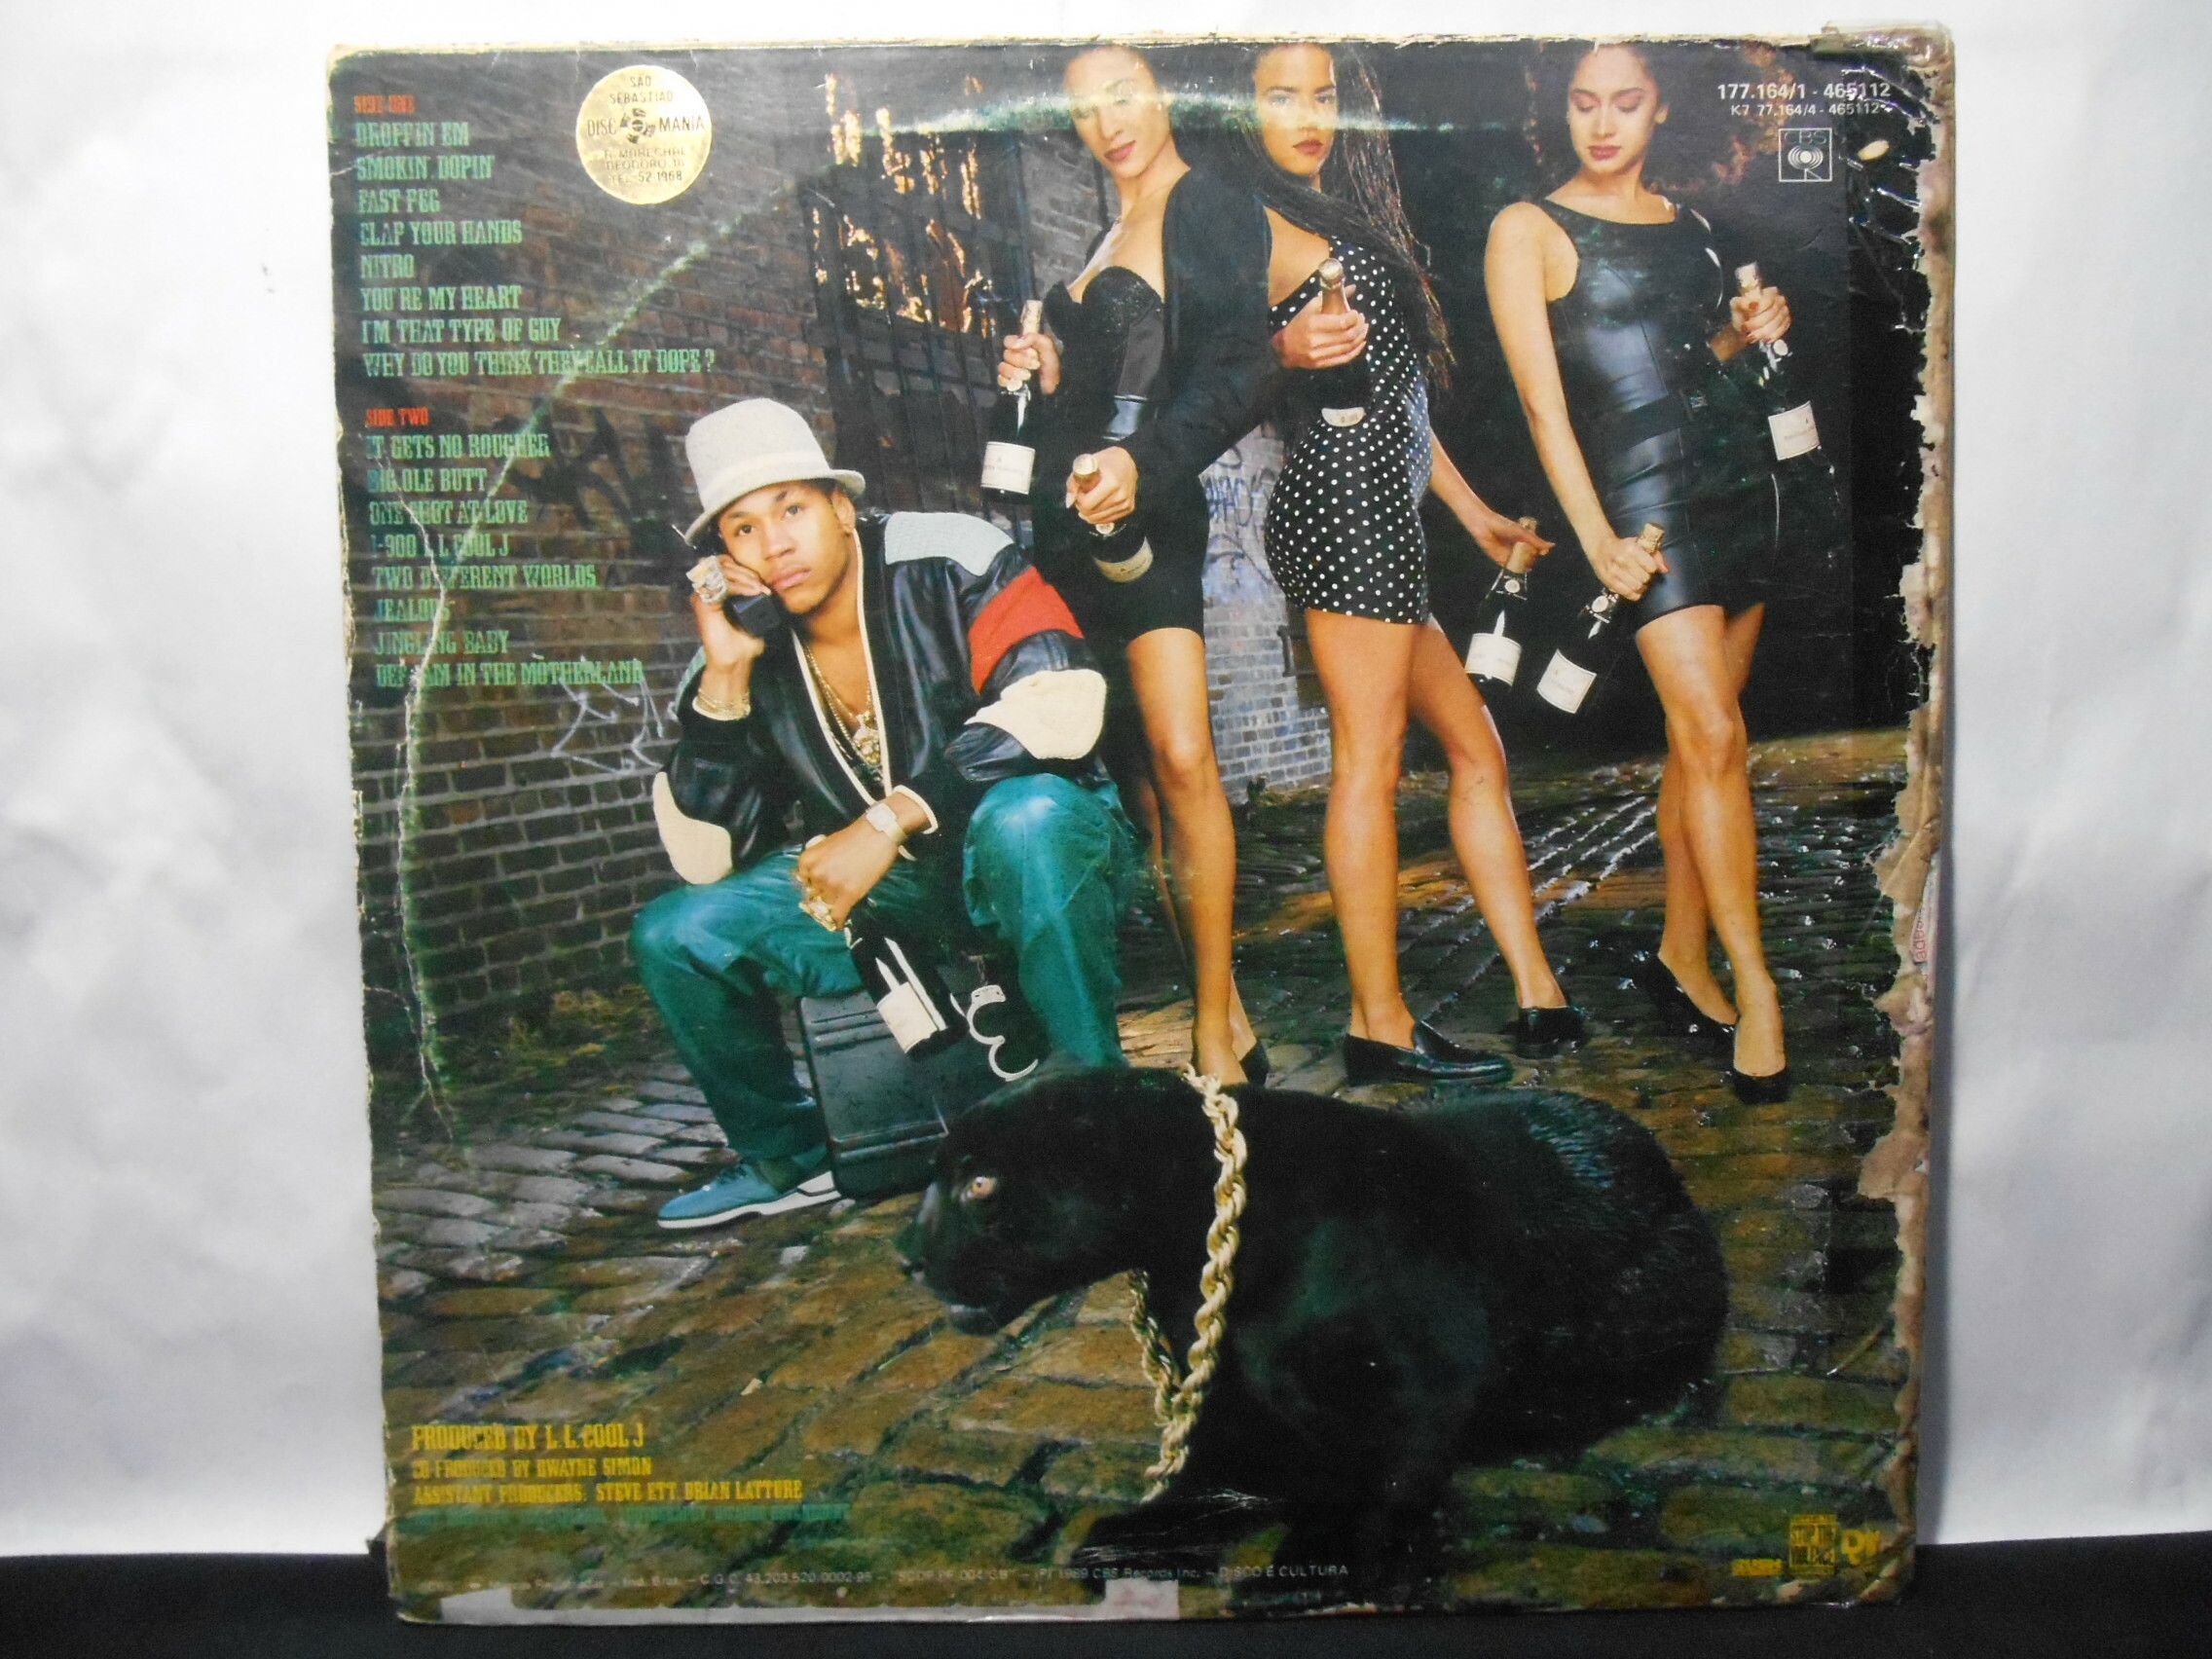 VINIL - LL Cool J - Walking With A Panther